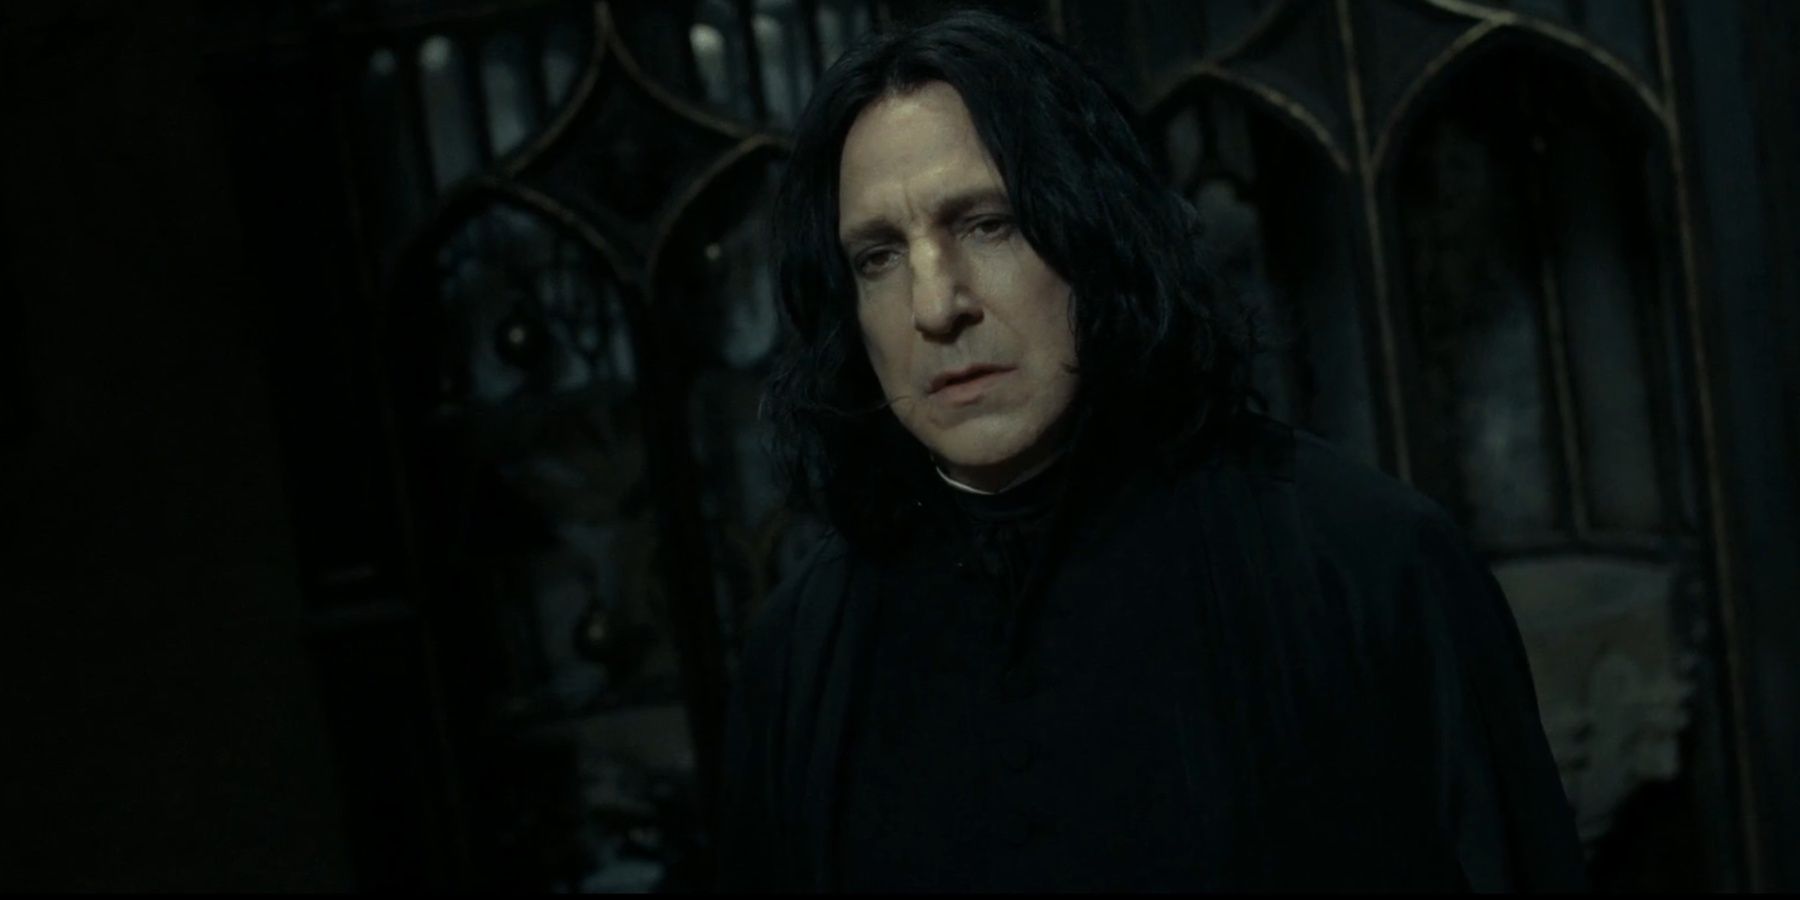 Severus Snape in Harry Potter and the Deathly Hallows: Part 2.